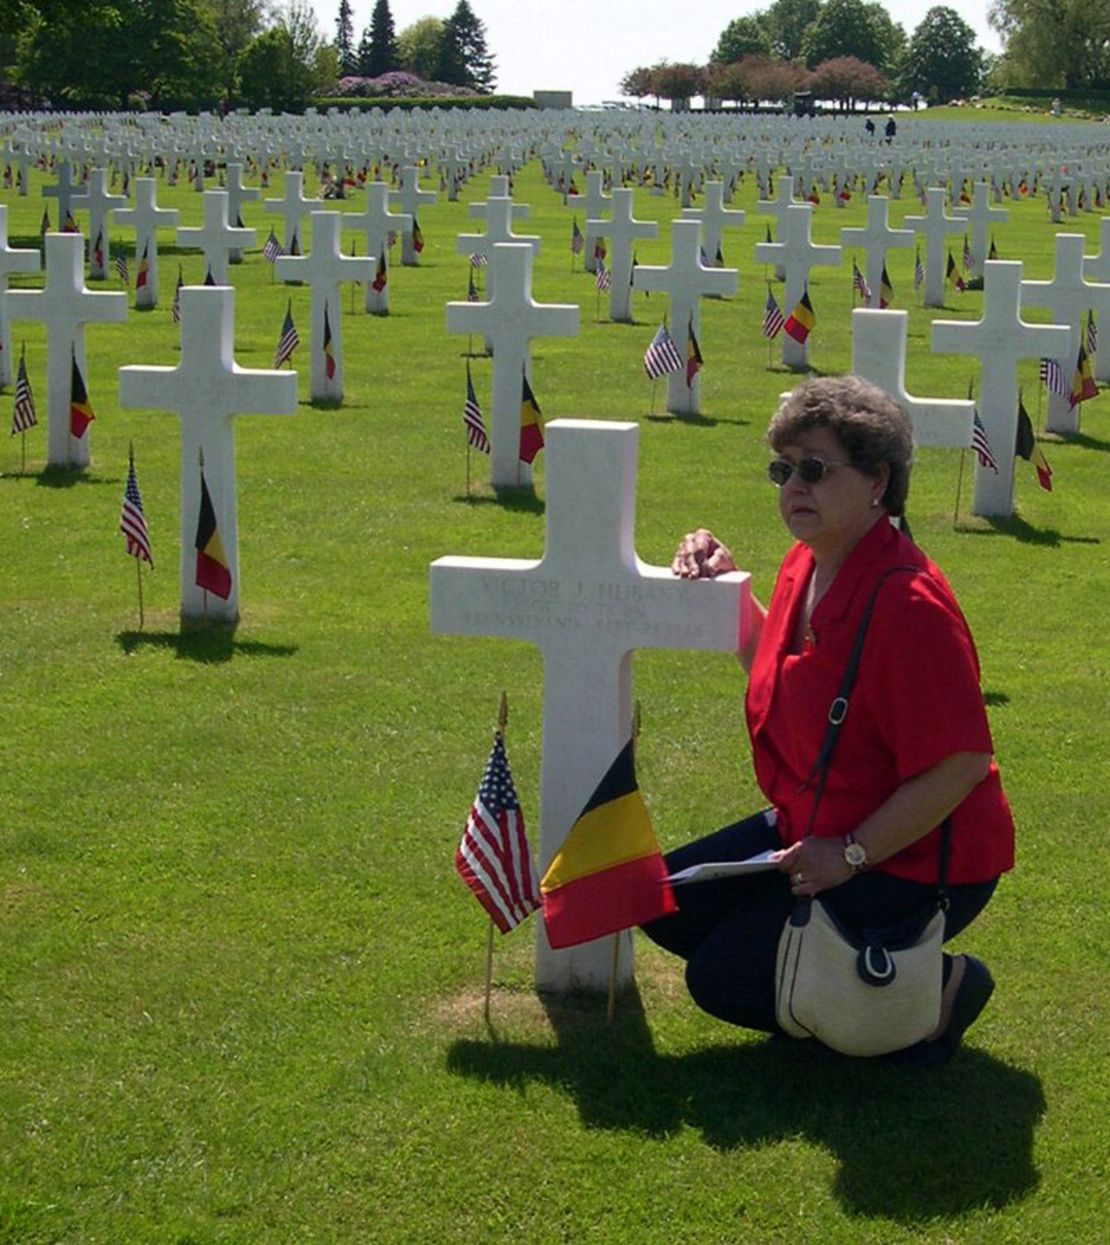 Carol Malone never met her father, but she visited his grave in Belgium's Henri-Chapelle American Cemetery in 2004.